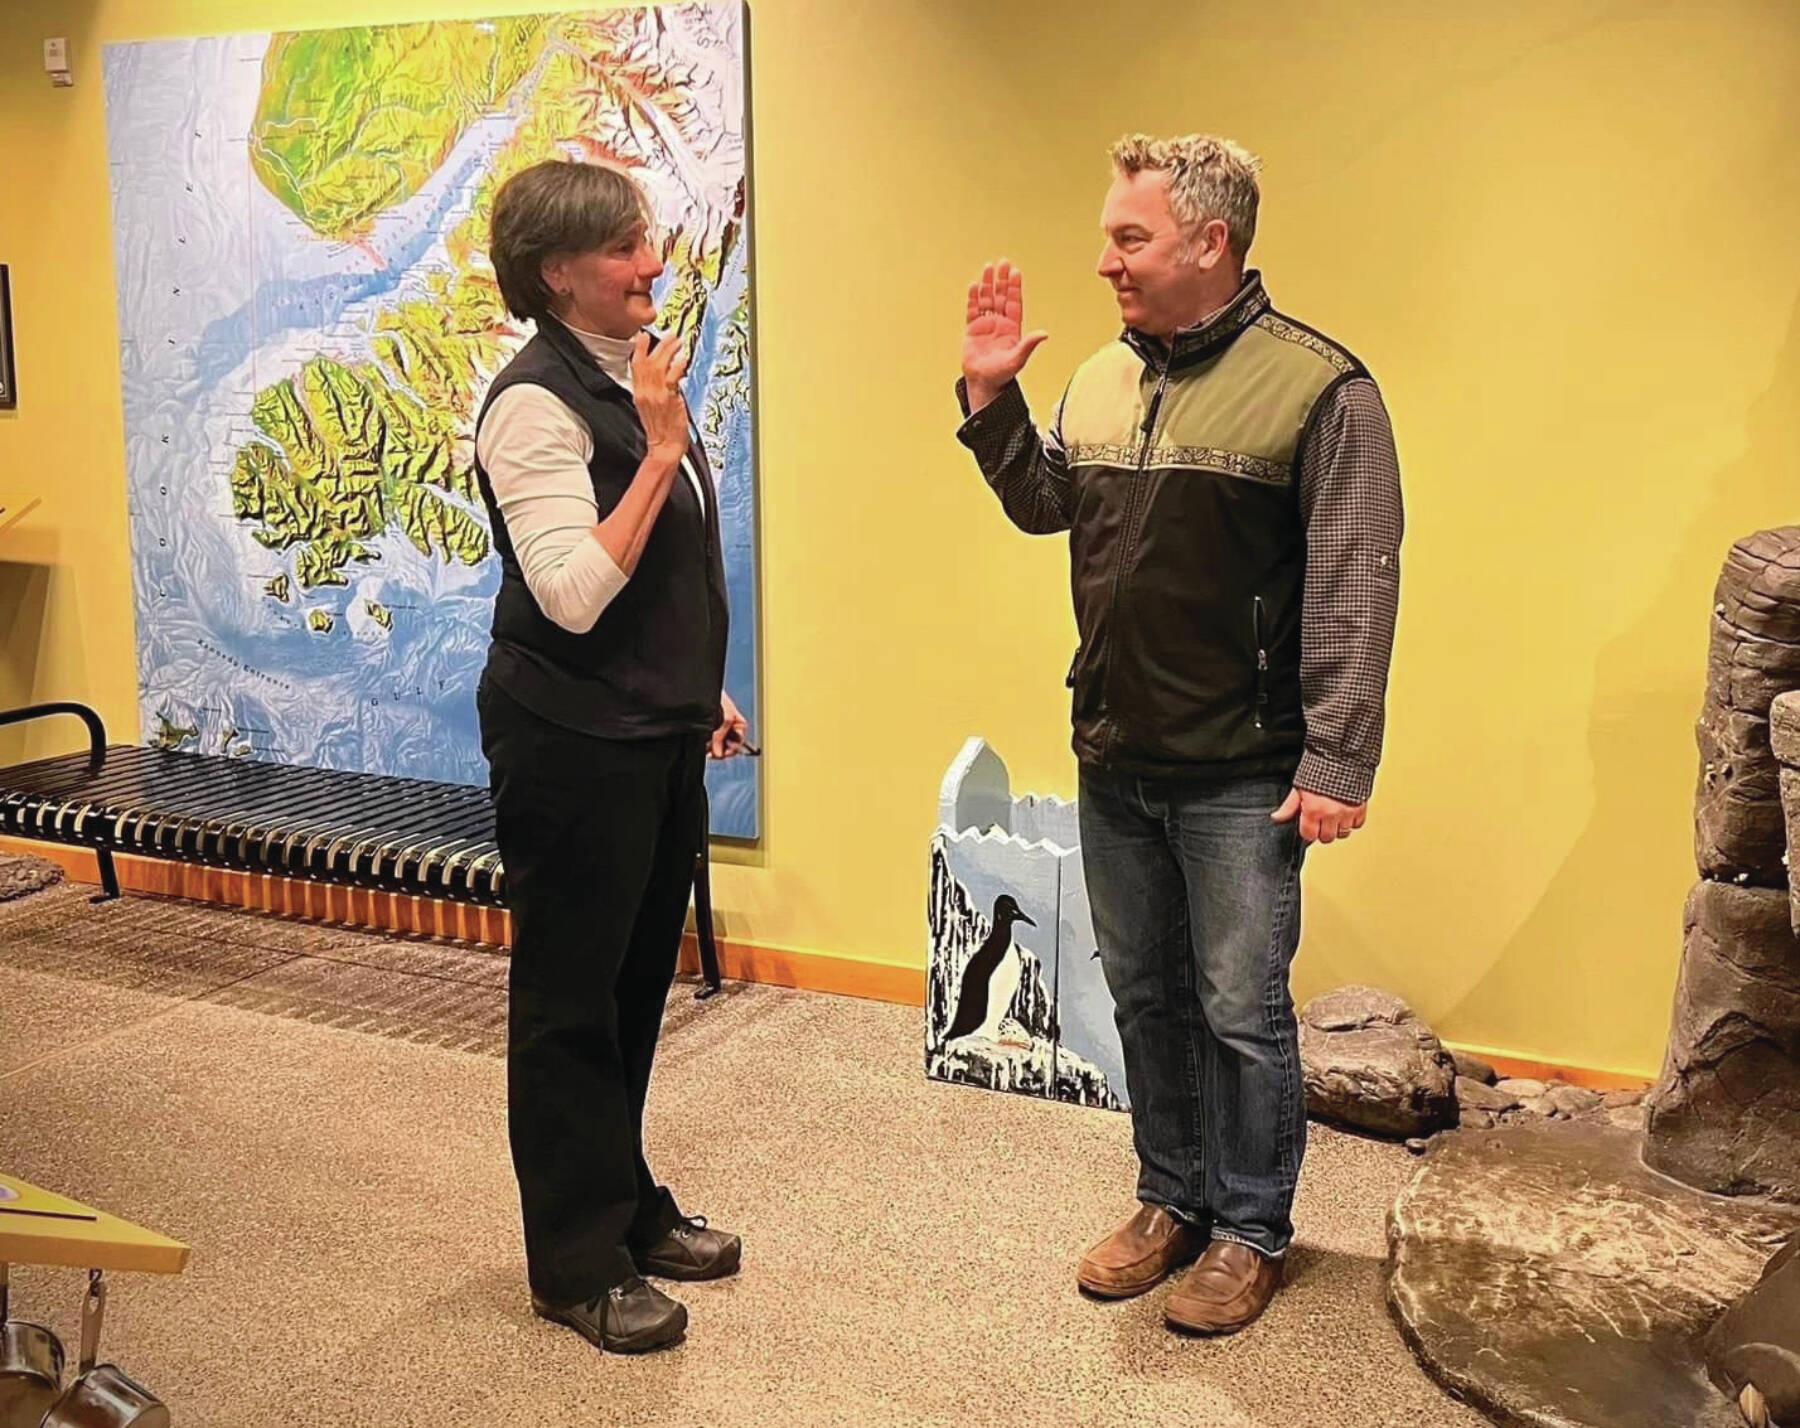 Photo provided by Sarah Brewer
Reid Brewer takes the helm from Kris Holderied as new director at the Kasitsna Bay Lab at Homer Islands and Oceans Center on Jan. 16.